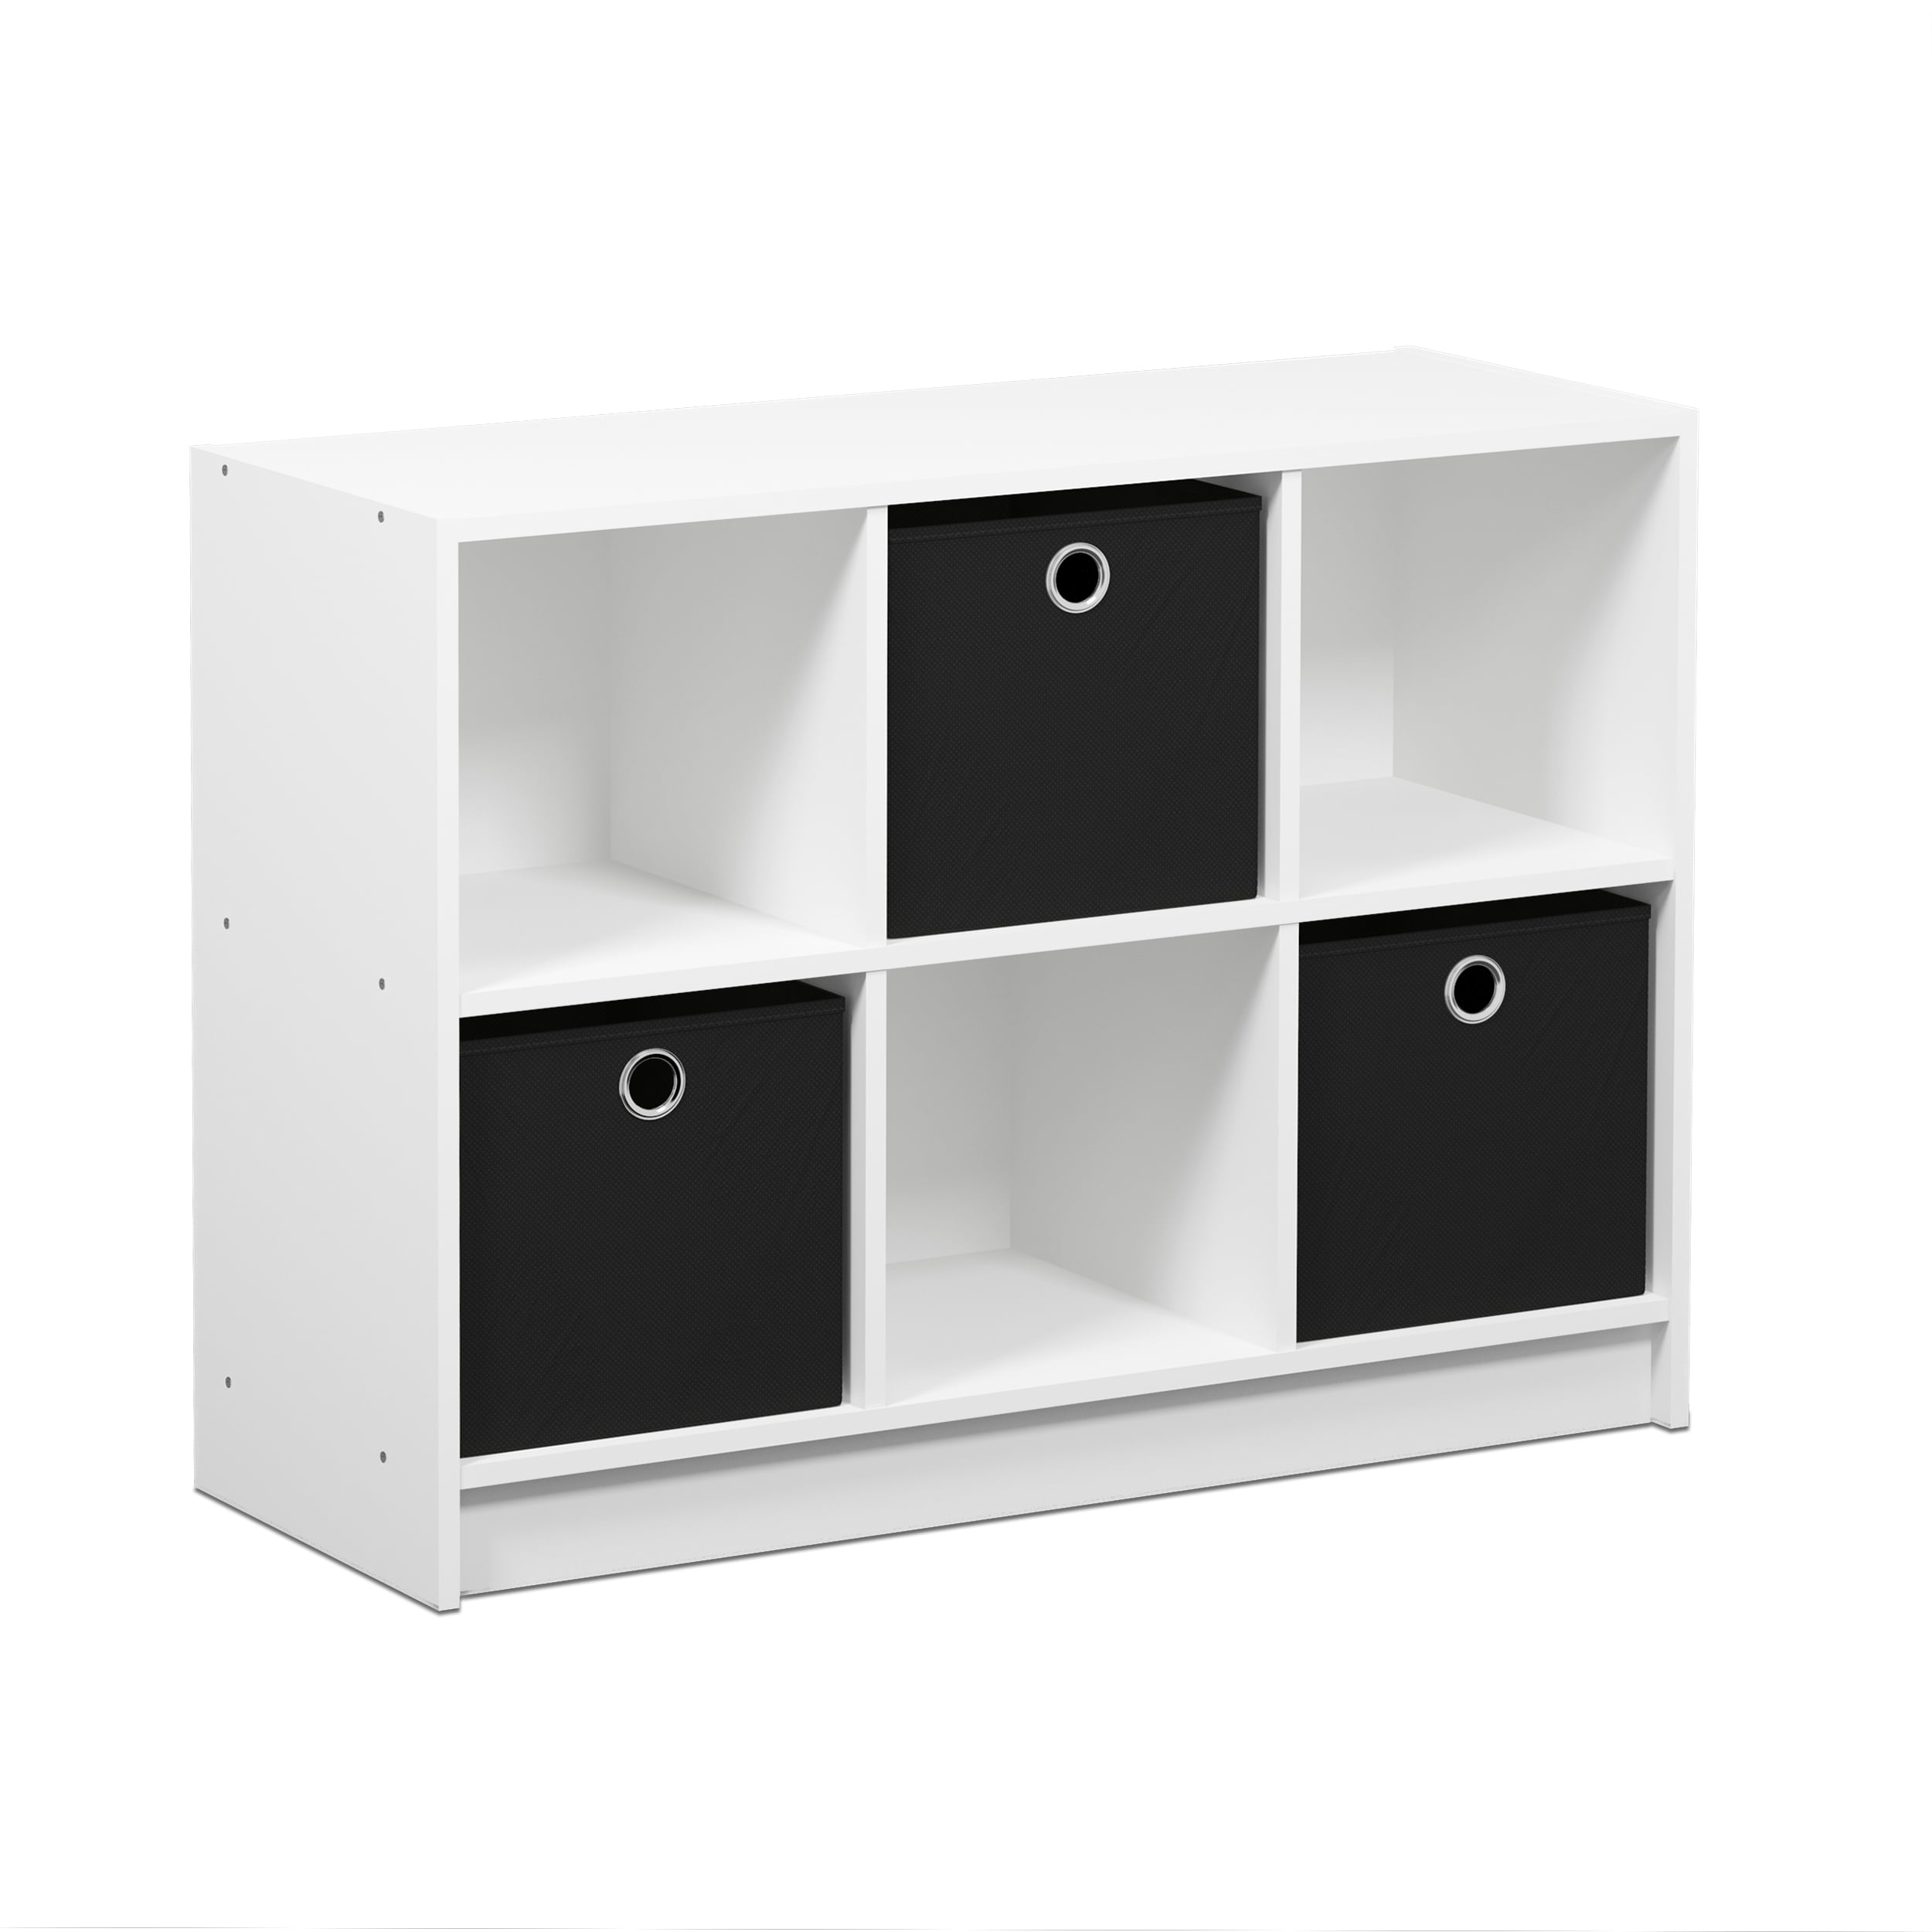 Details about   Basic 6 Cube Storage Organizer Bookcase Storage with Bins Multiple Colors 